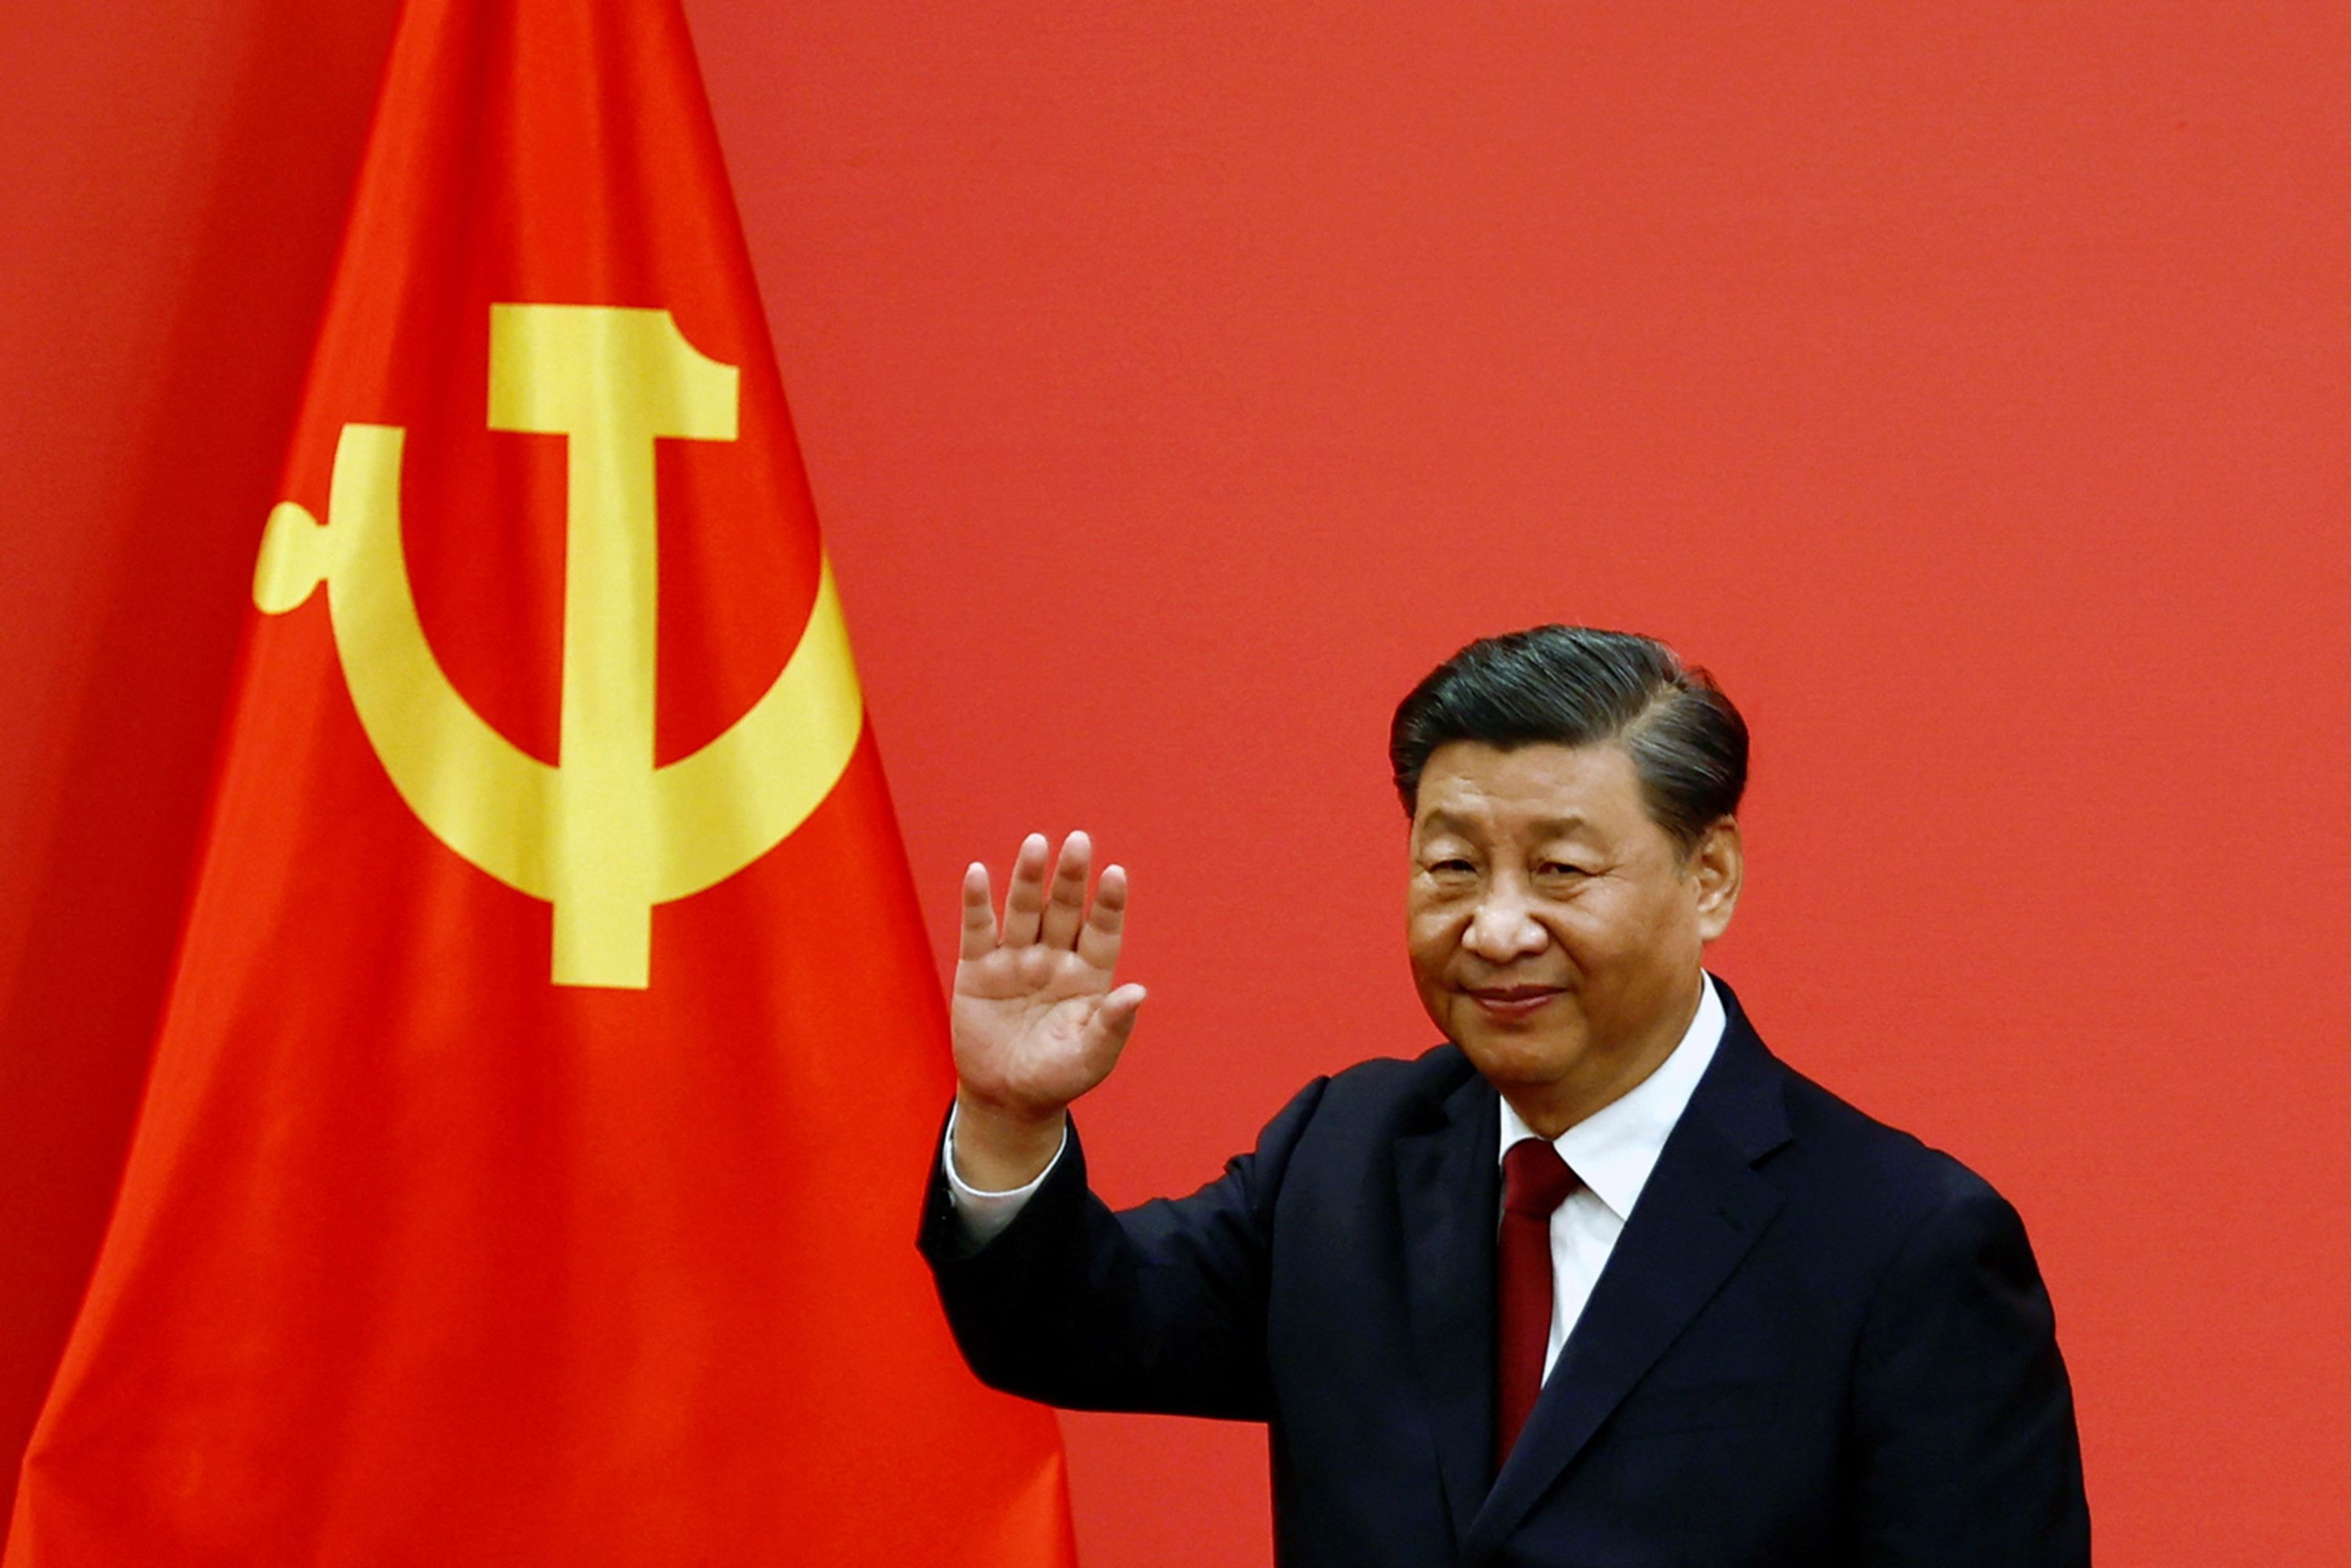 Chinese leader Xi Jinping introduces new members of the Politburo Standing Committee in Beijing.